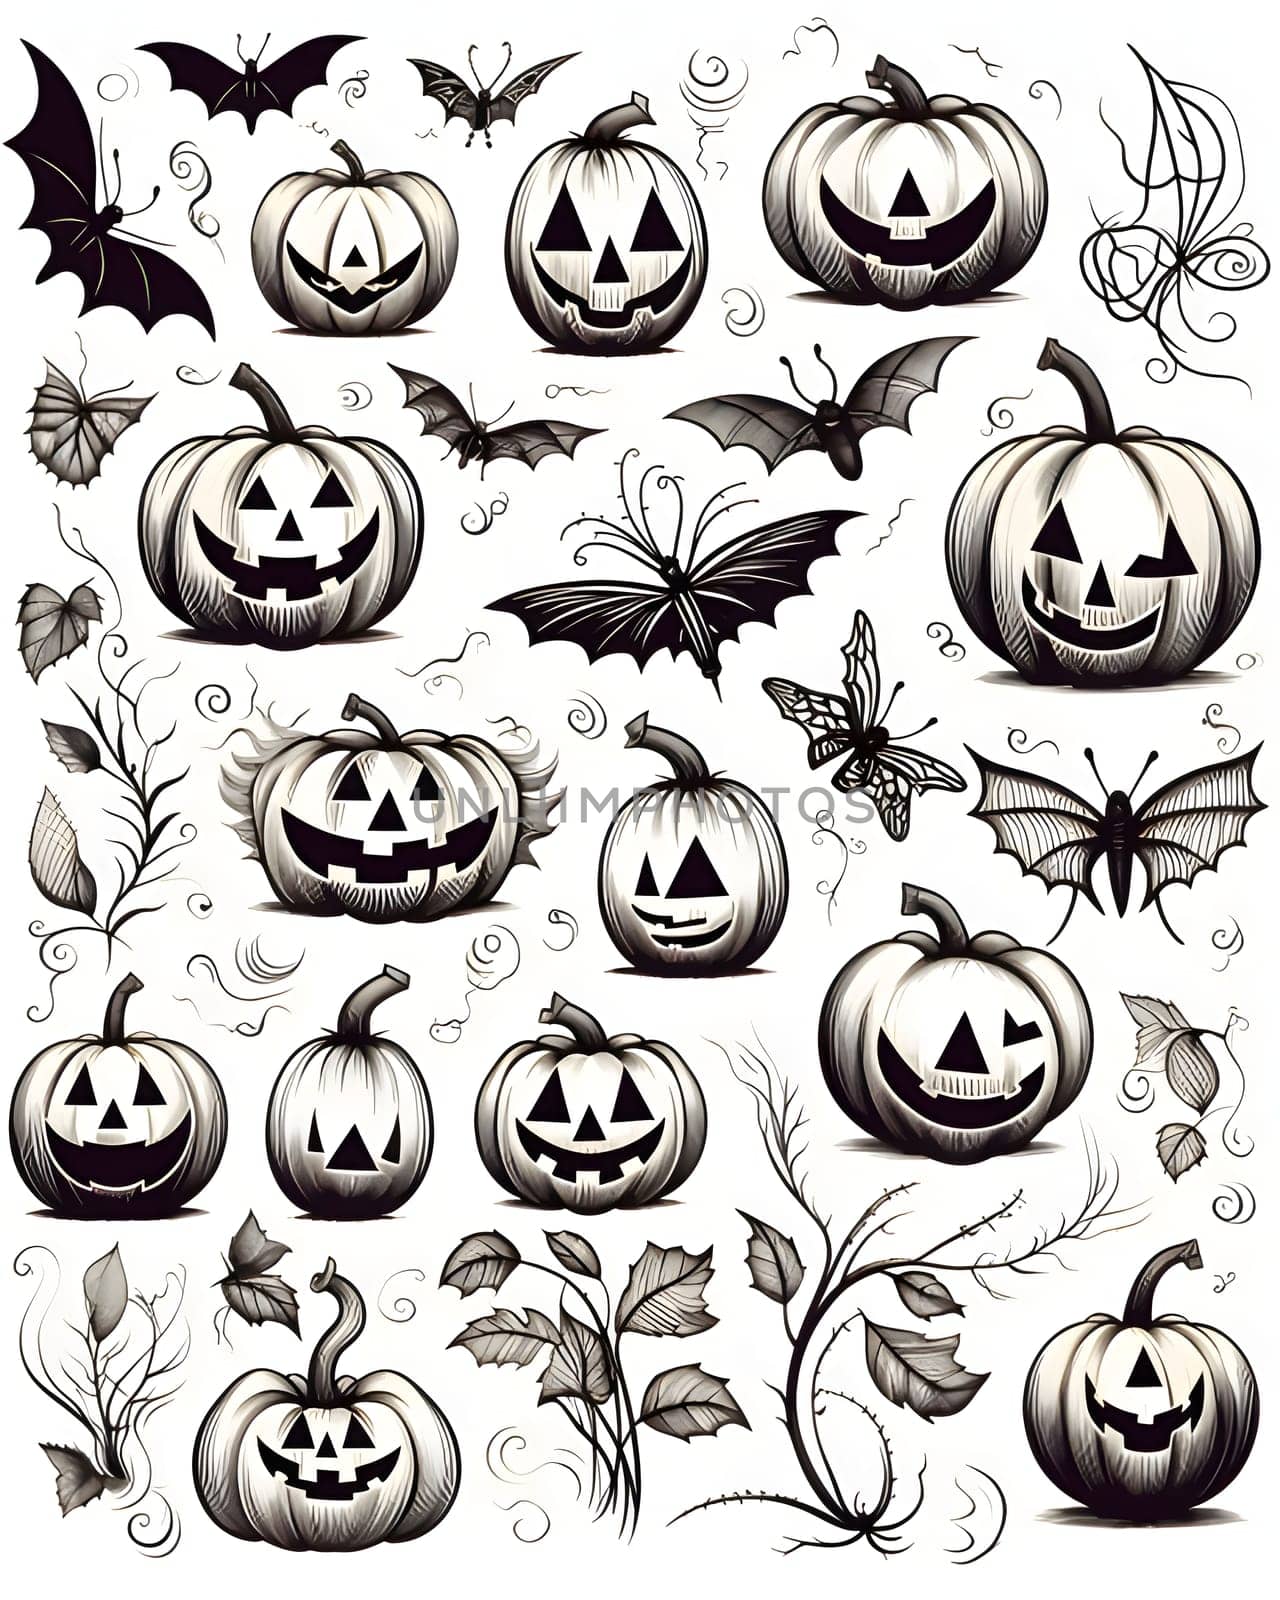 Black and white jack-o-lantern pumpkins and bats as abstract background, wallpaper, banner, texture design with pattern - vector. by ThemesS